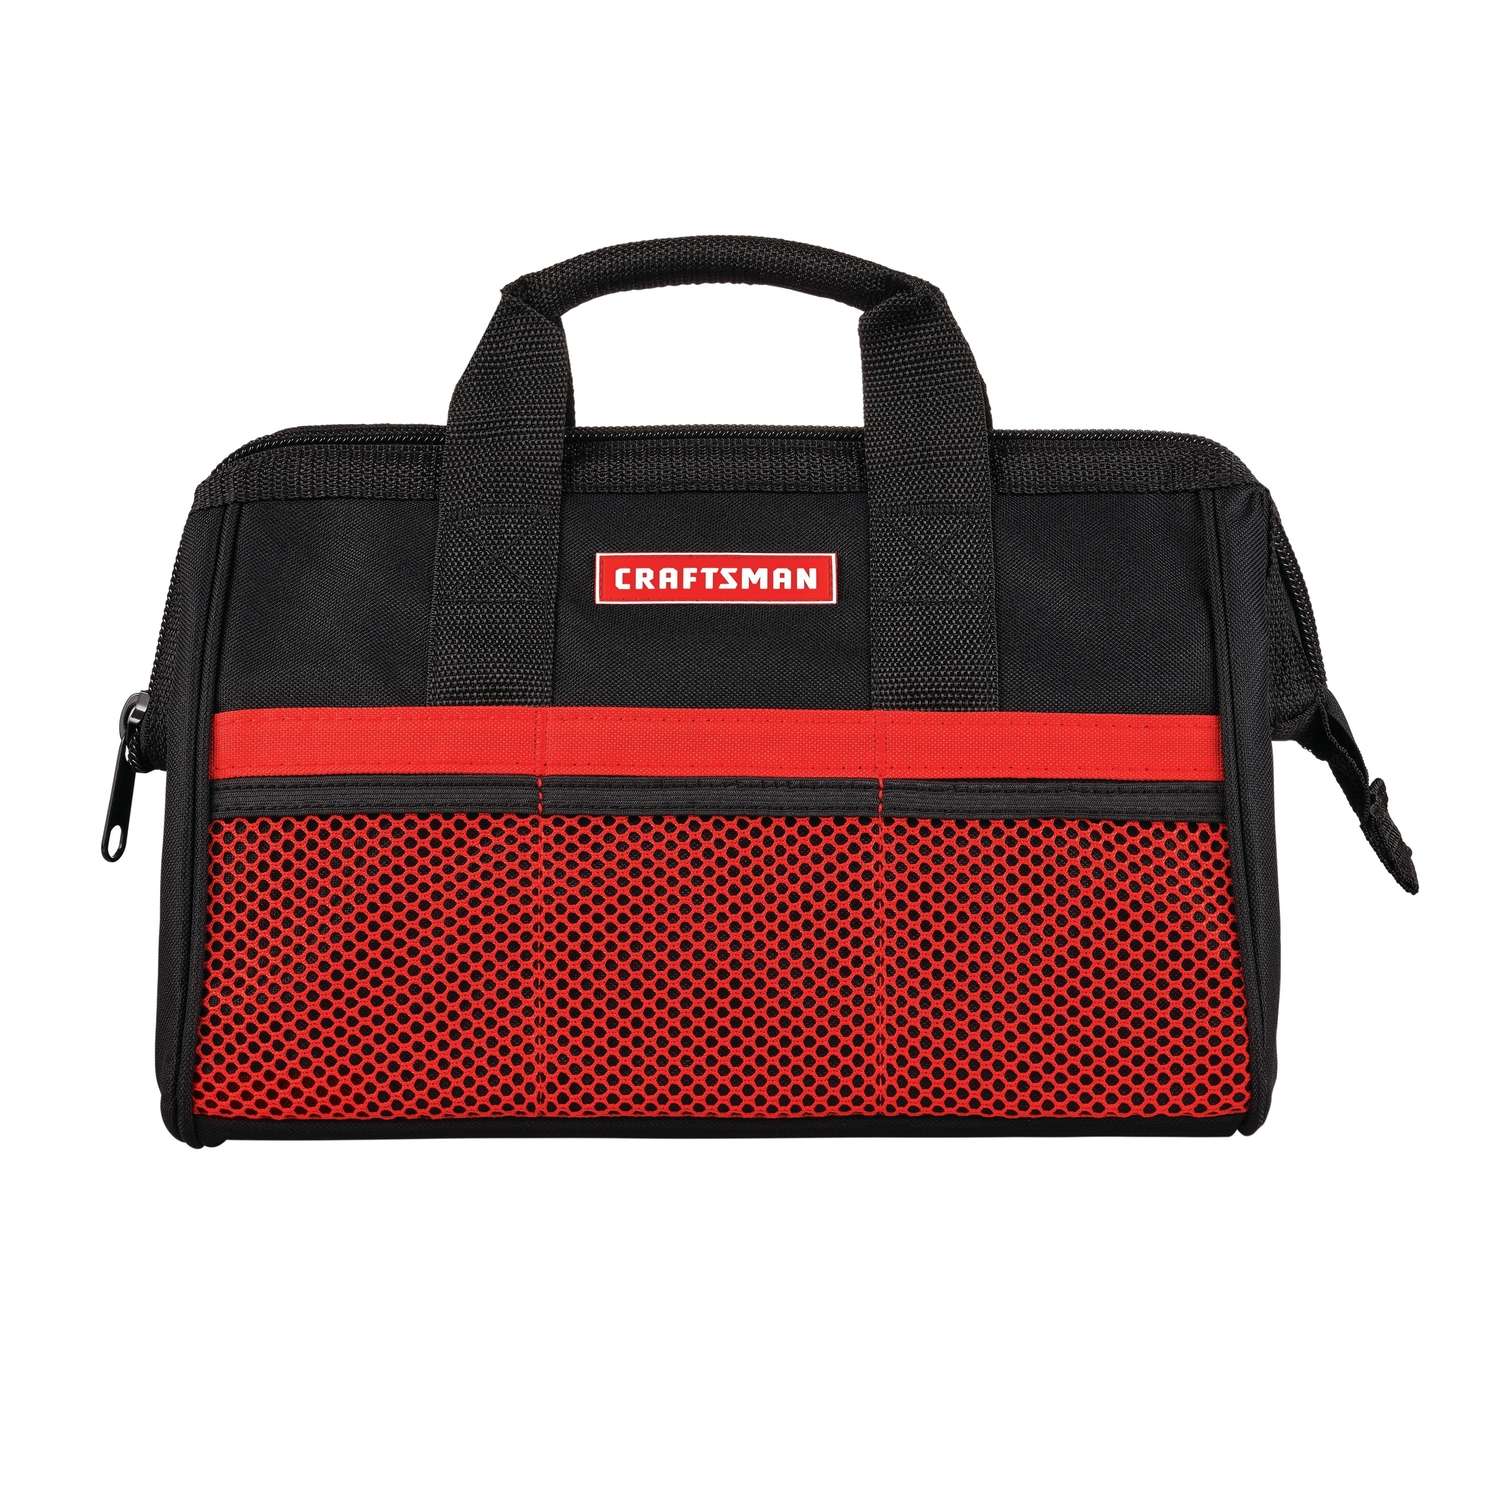 Craftsman 13 in. W X 9.75 in. H Wide Mouth Tool Bag pocket Black/Red  Ace Hardware